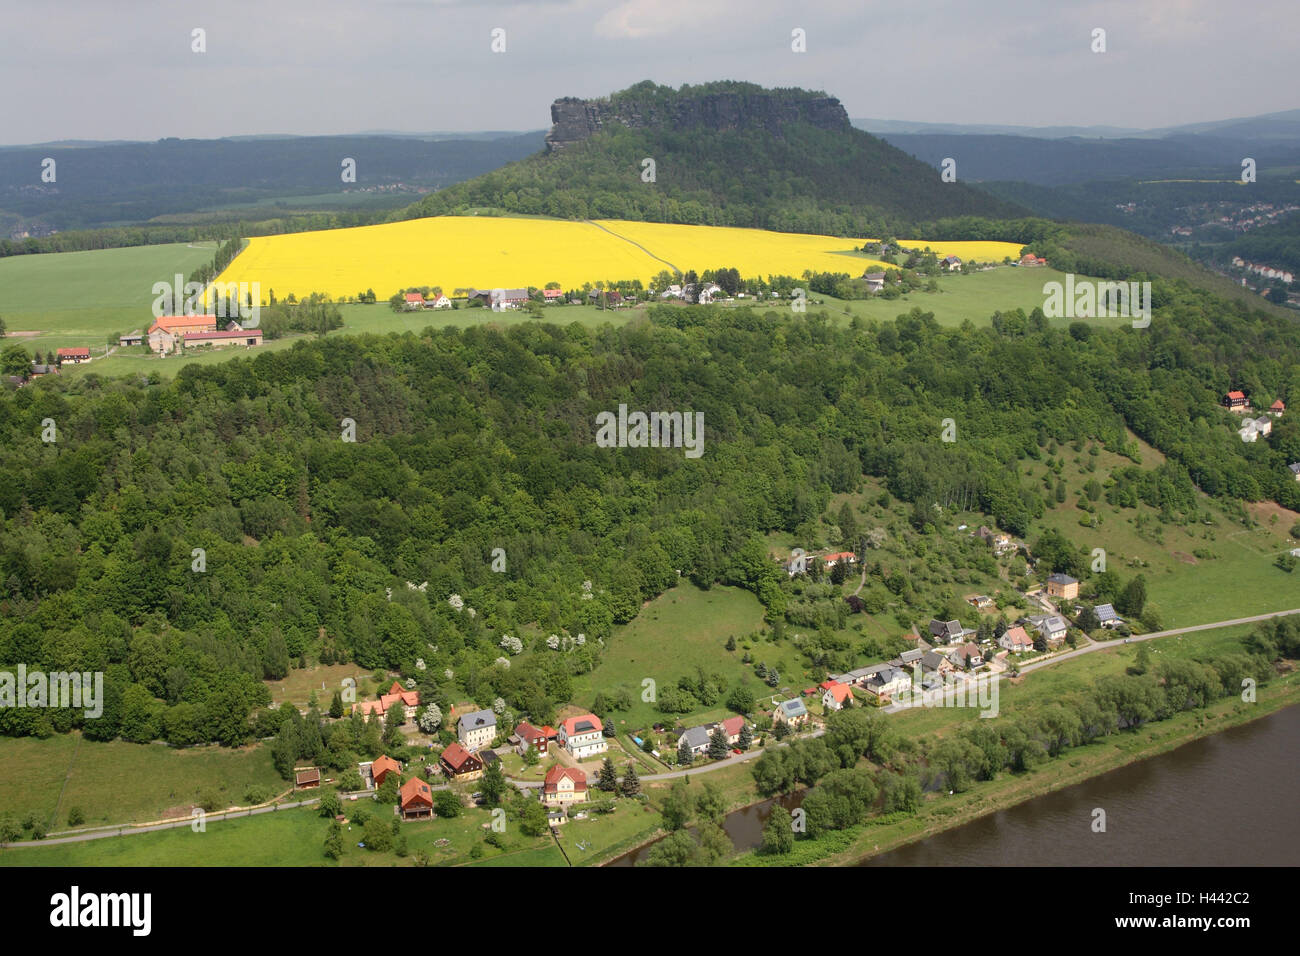 Germany, Saxon Switzerland, fortress King's stone, Valley view, the Elbe, holiday ship, Stock Photo